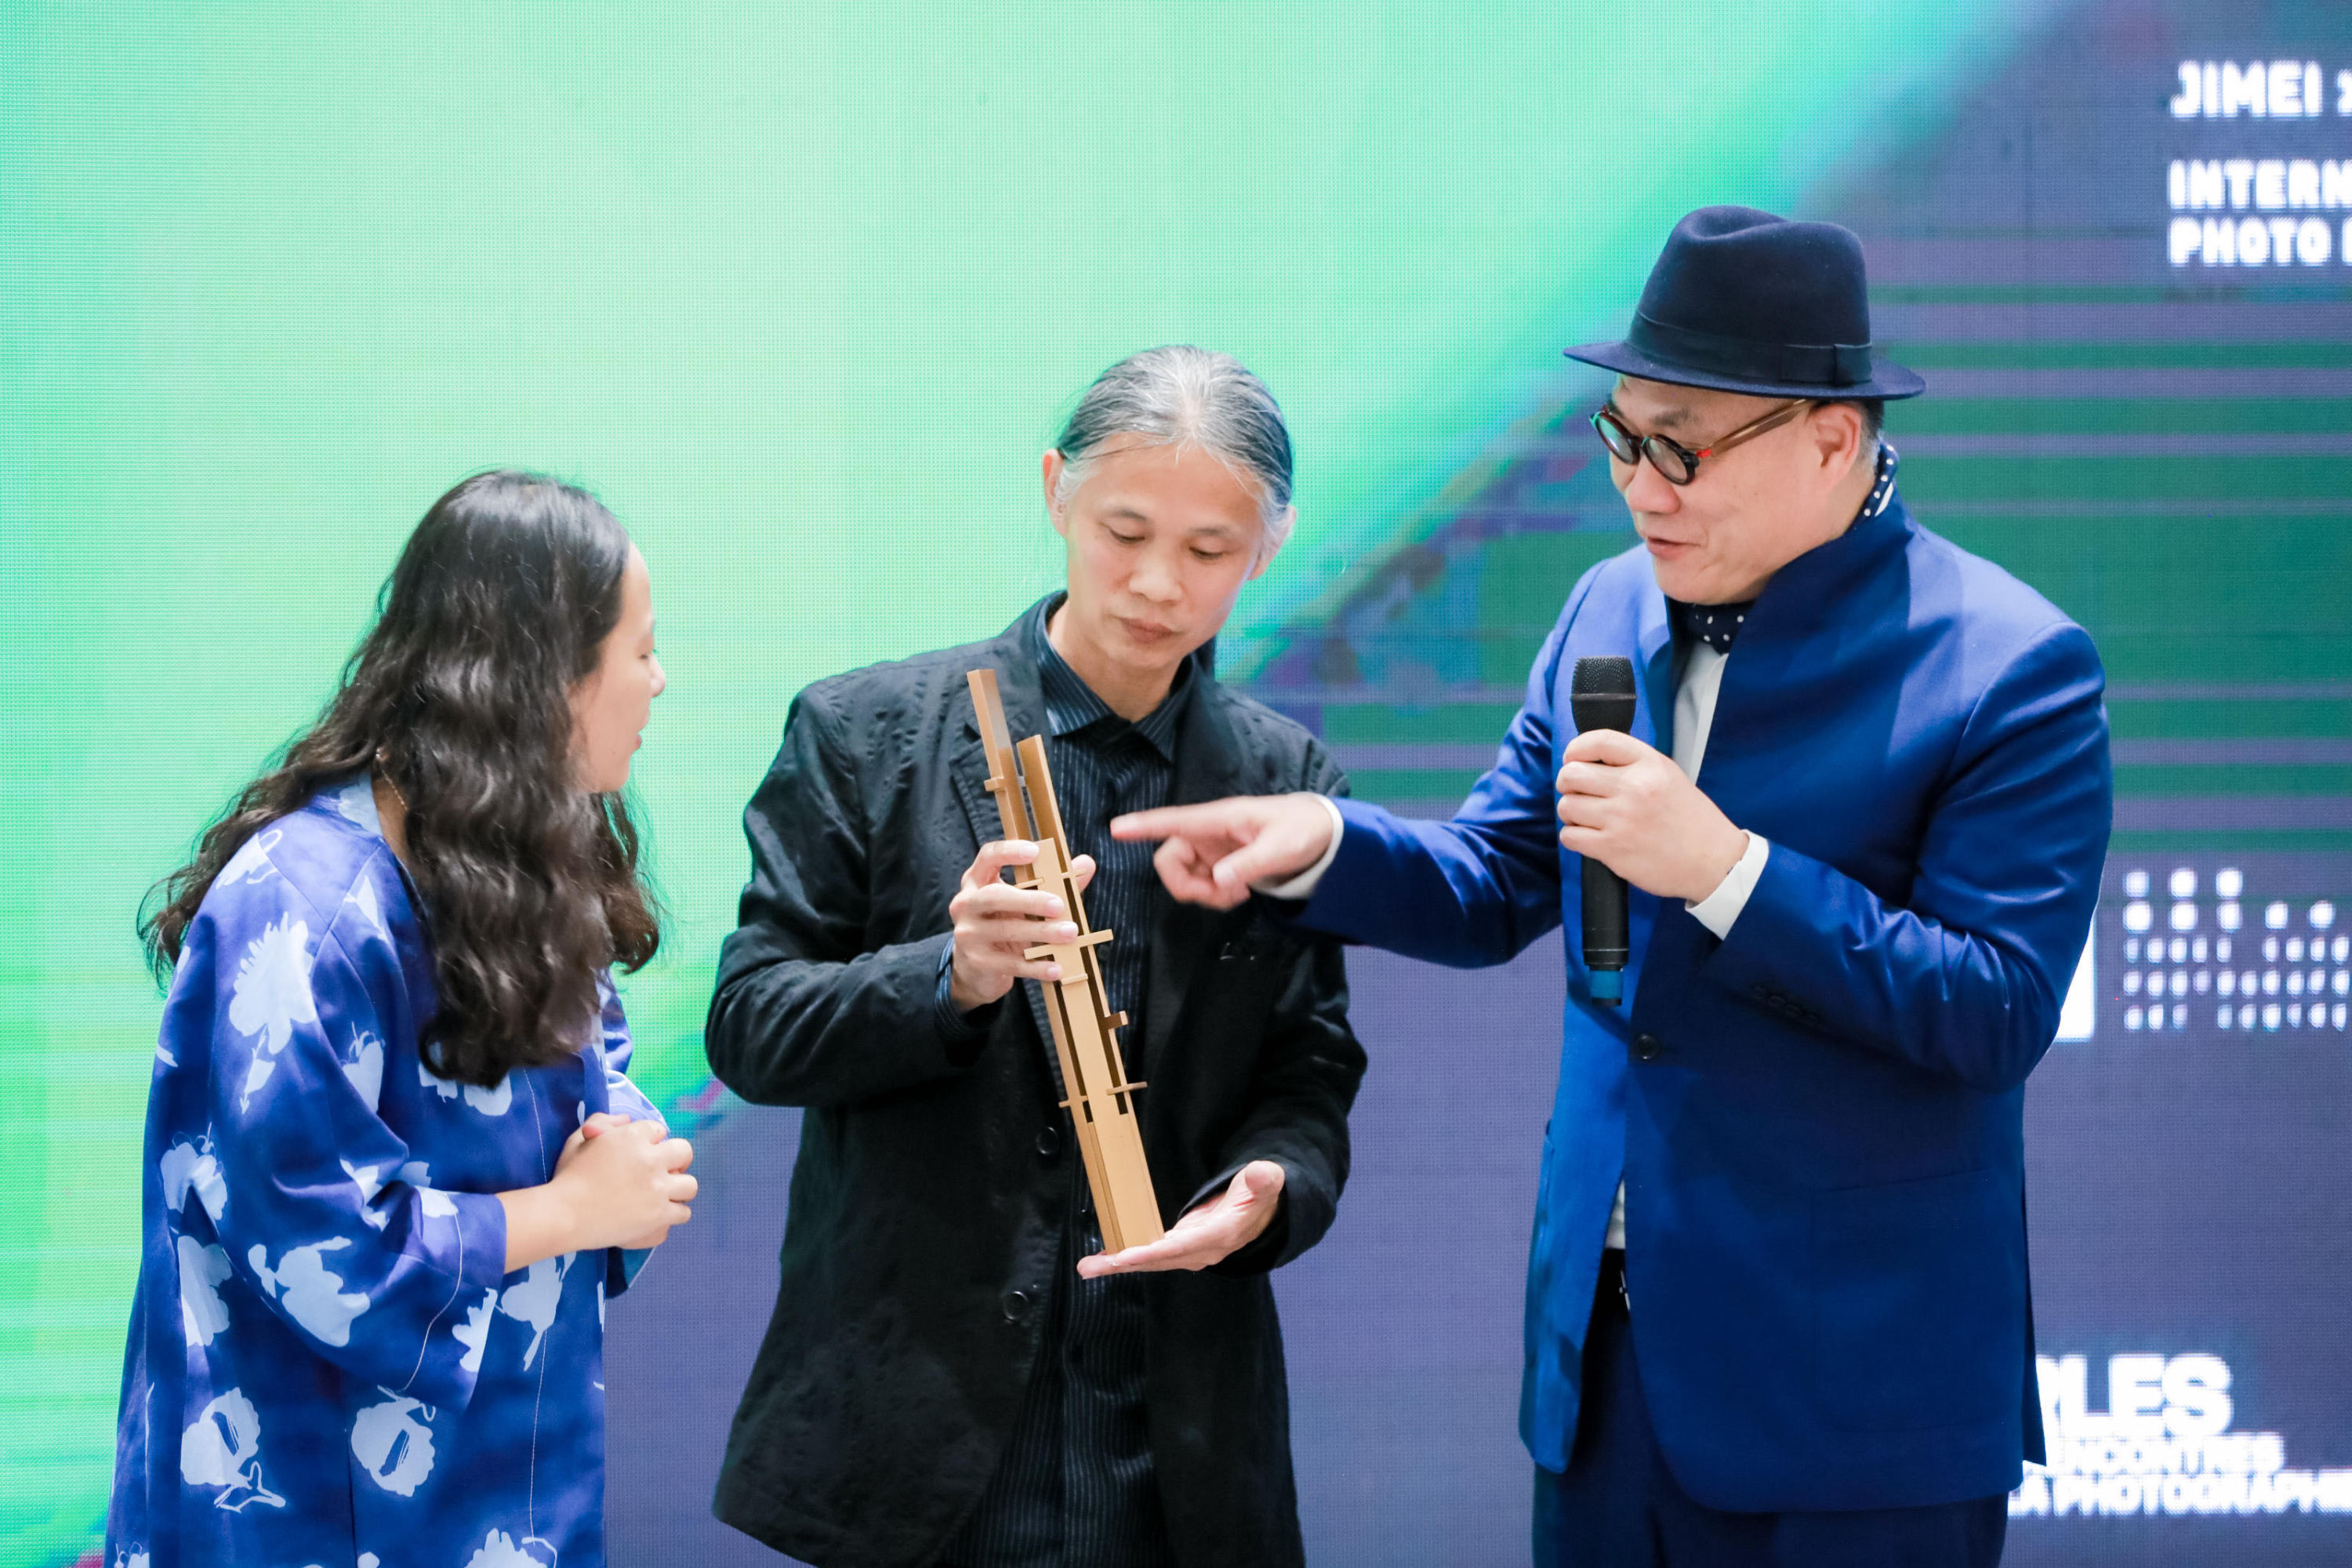 Jimei x Arles International Photo Festival “Curatorial Award for Photograph and Moving Image" Ceremony was held at  Three Shadows Photography Art Centre in Xiamen, with PILLS Responsible for the Design of the Trophy